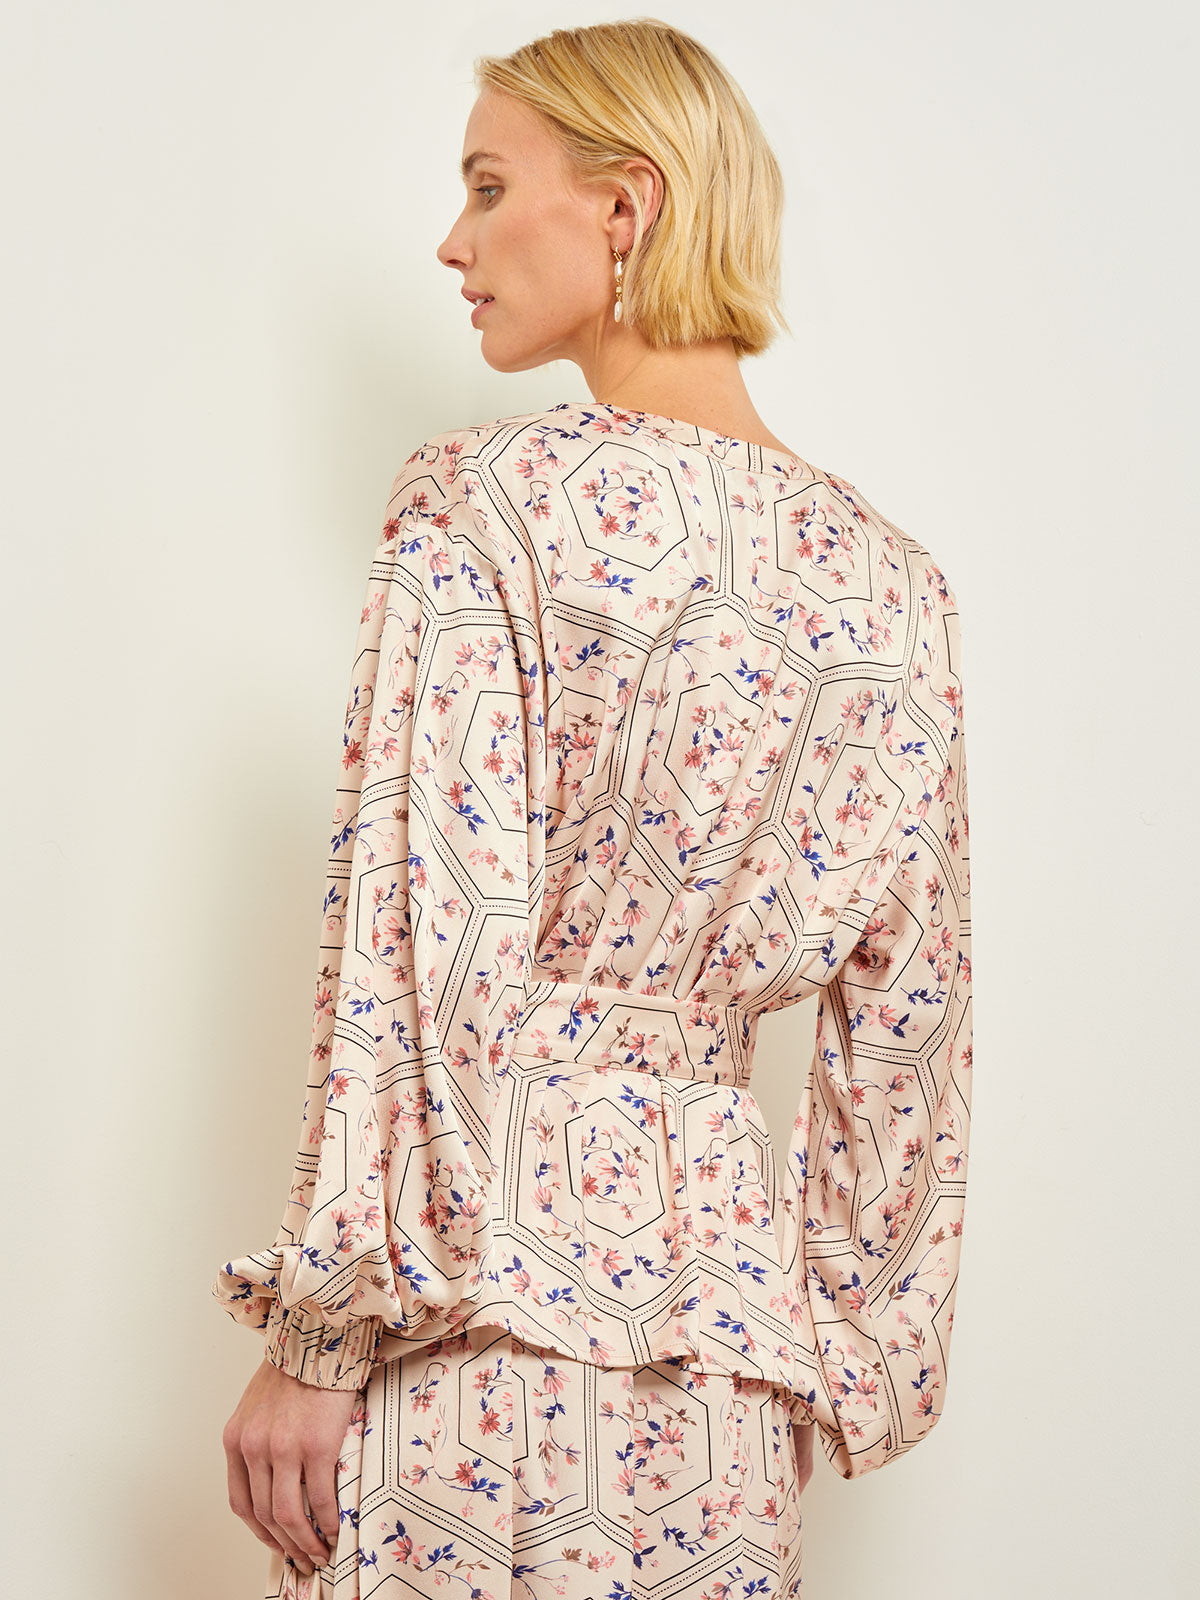 Balloon Sleeve Belted Blouse - Floral Print Crepe de Chine